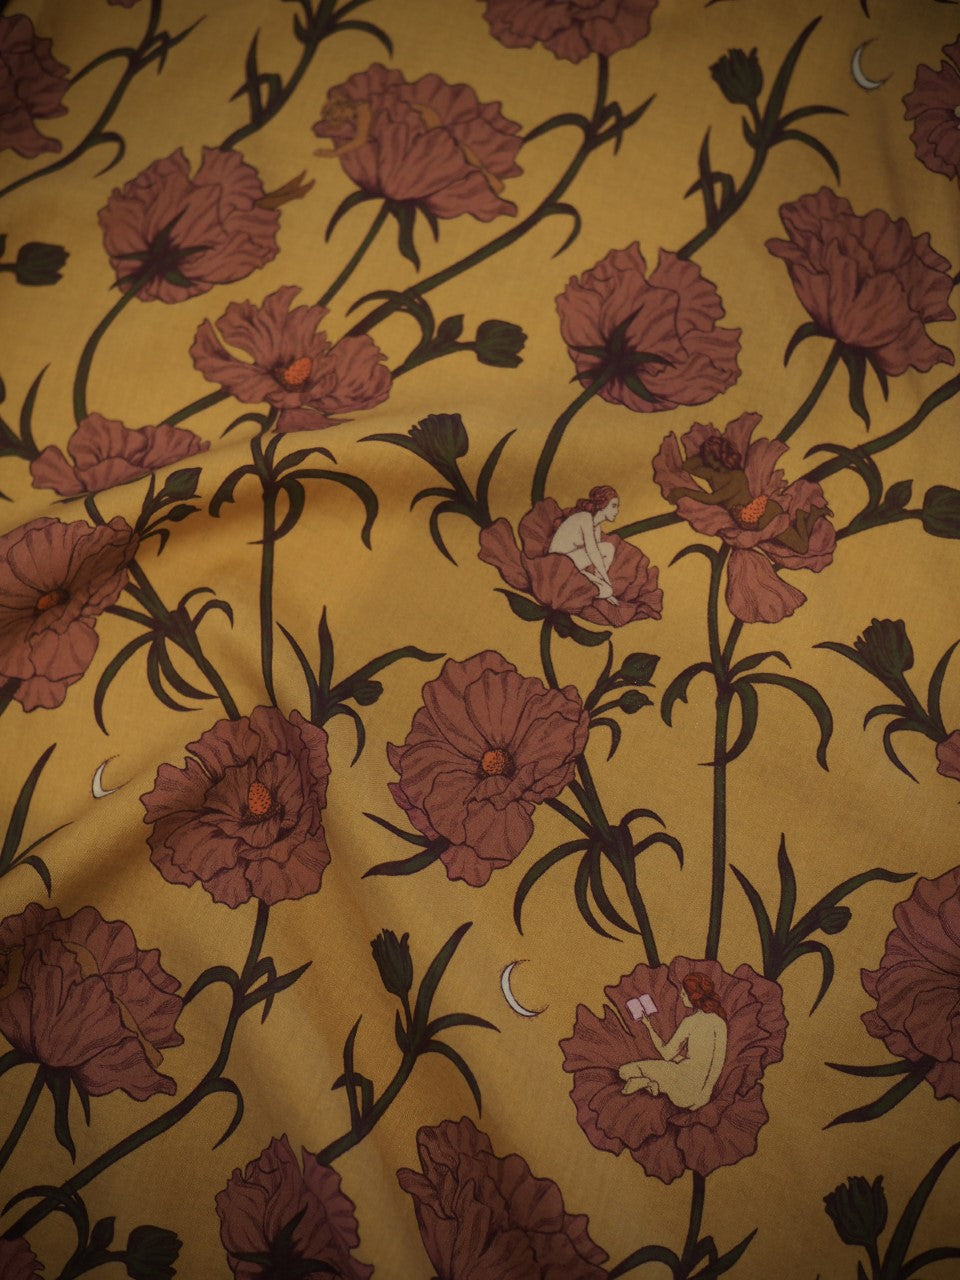 Lightweight eco-friendly Tencel fabric showing print of "The Women who Sleep Among the Flowers" in yellow and pink colorway